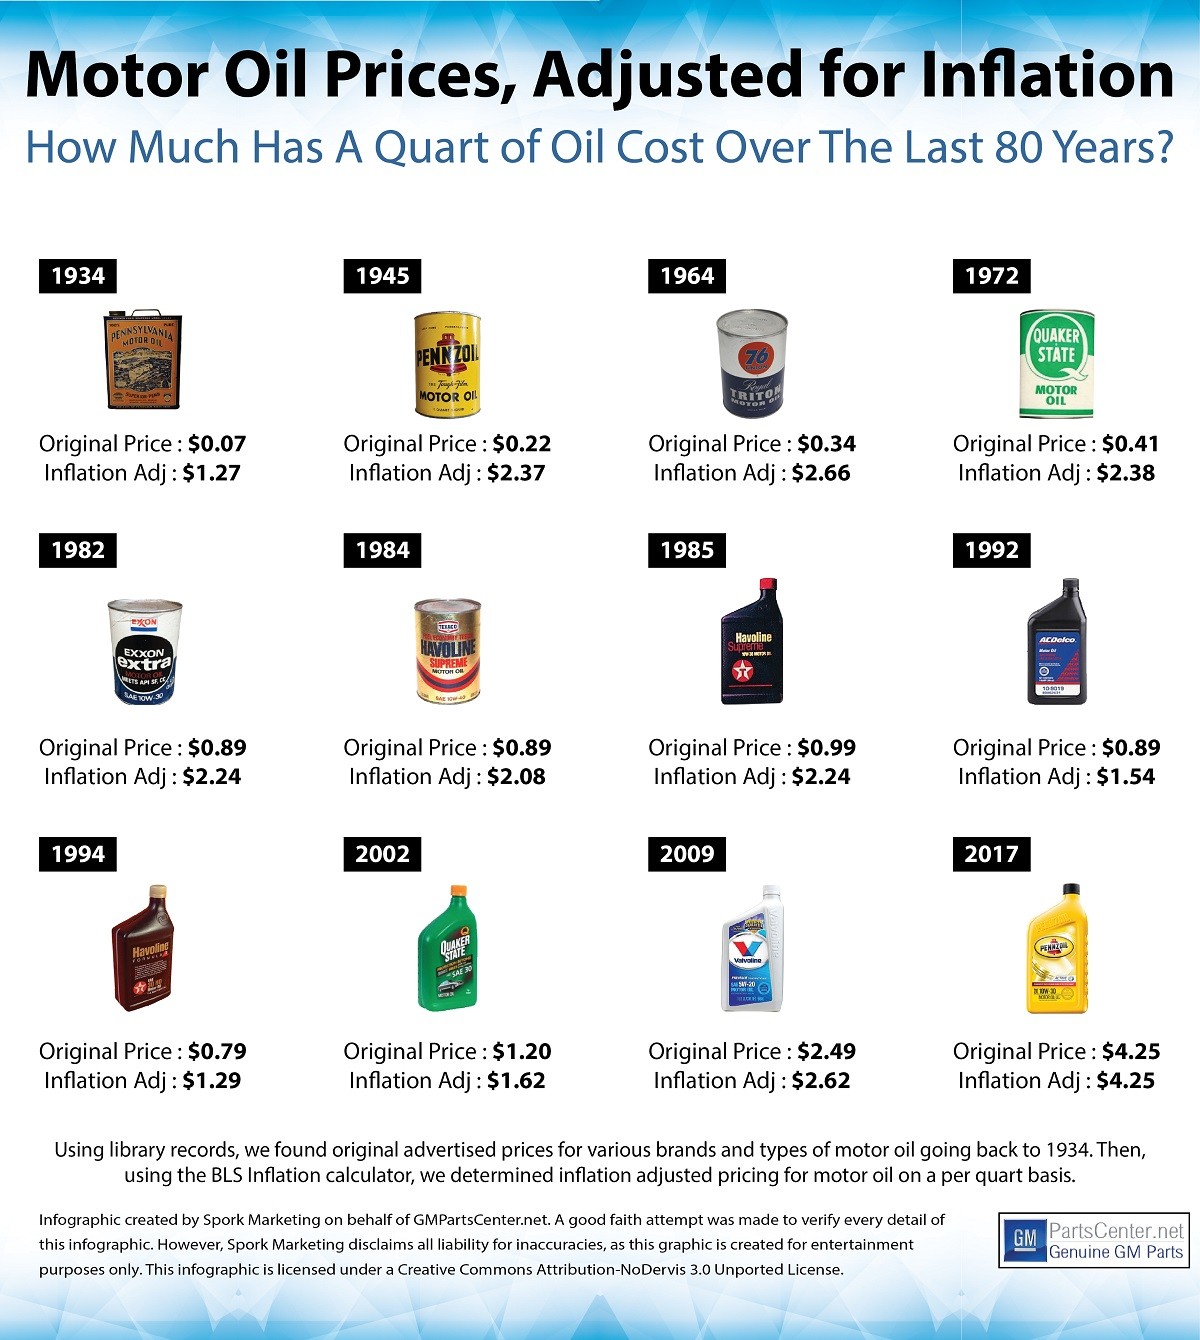 motor oil prices adjusted for inflation